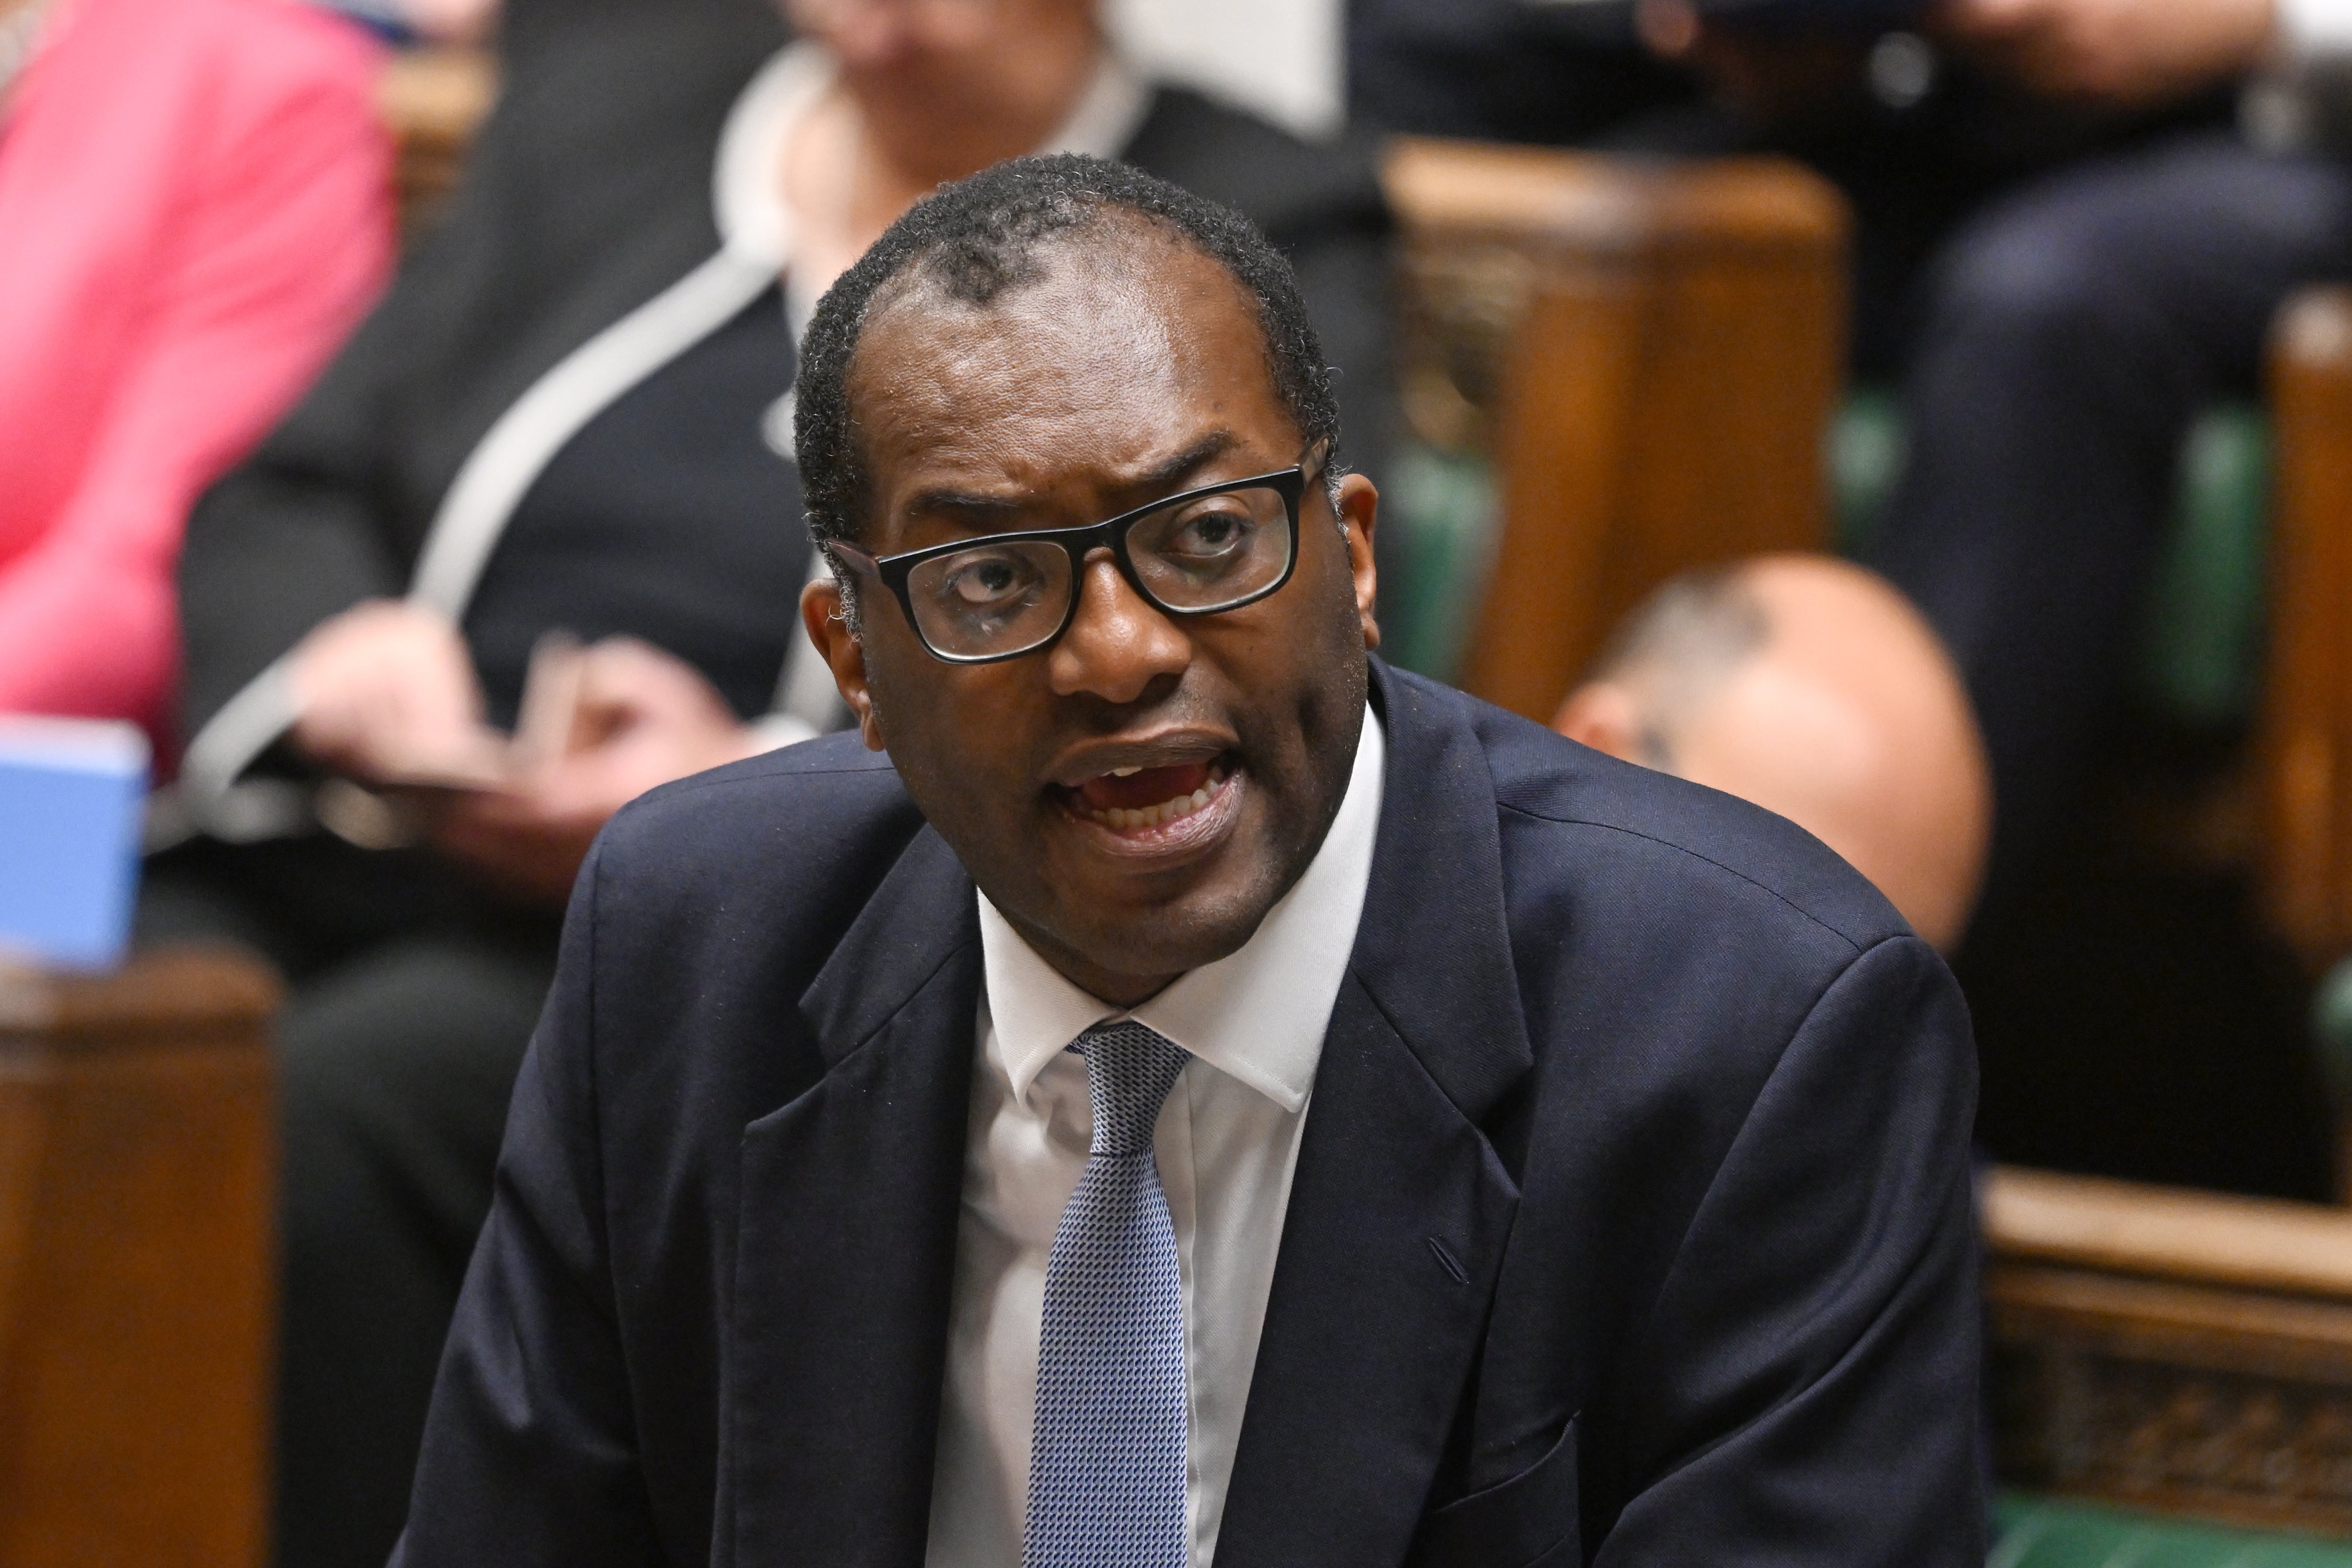 Kwasi Kwarteng announced the government’s plans on Friday (UK Parliament/Jessica Taylor/PA)